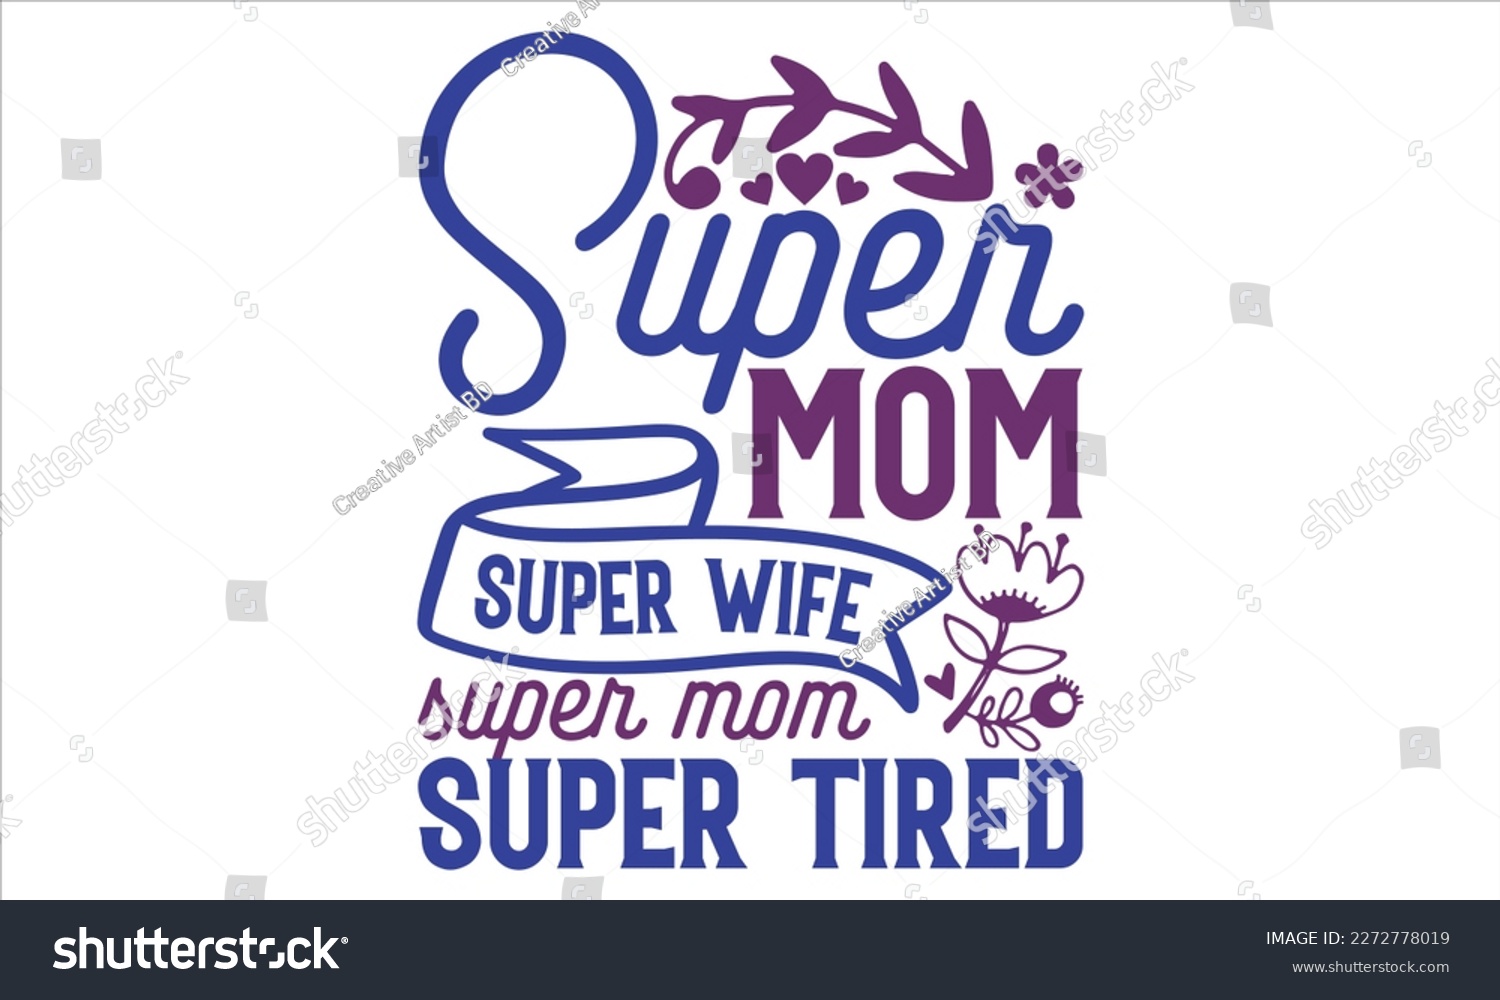 SVG of Super Mom Super Wife Super Mom Super Tired - Mother’s Day T shirt Design,  svg files for Cutting, bag, cups, card, prints and posters svg